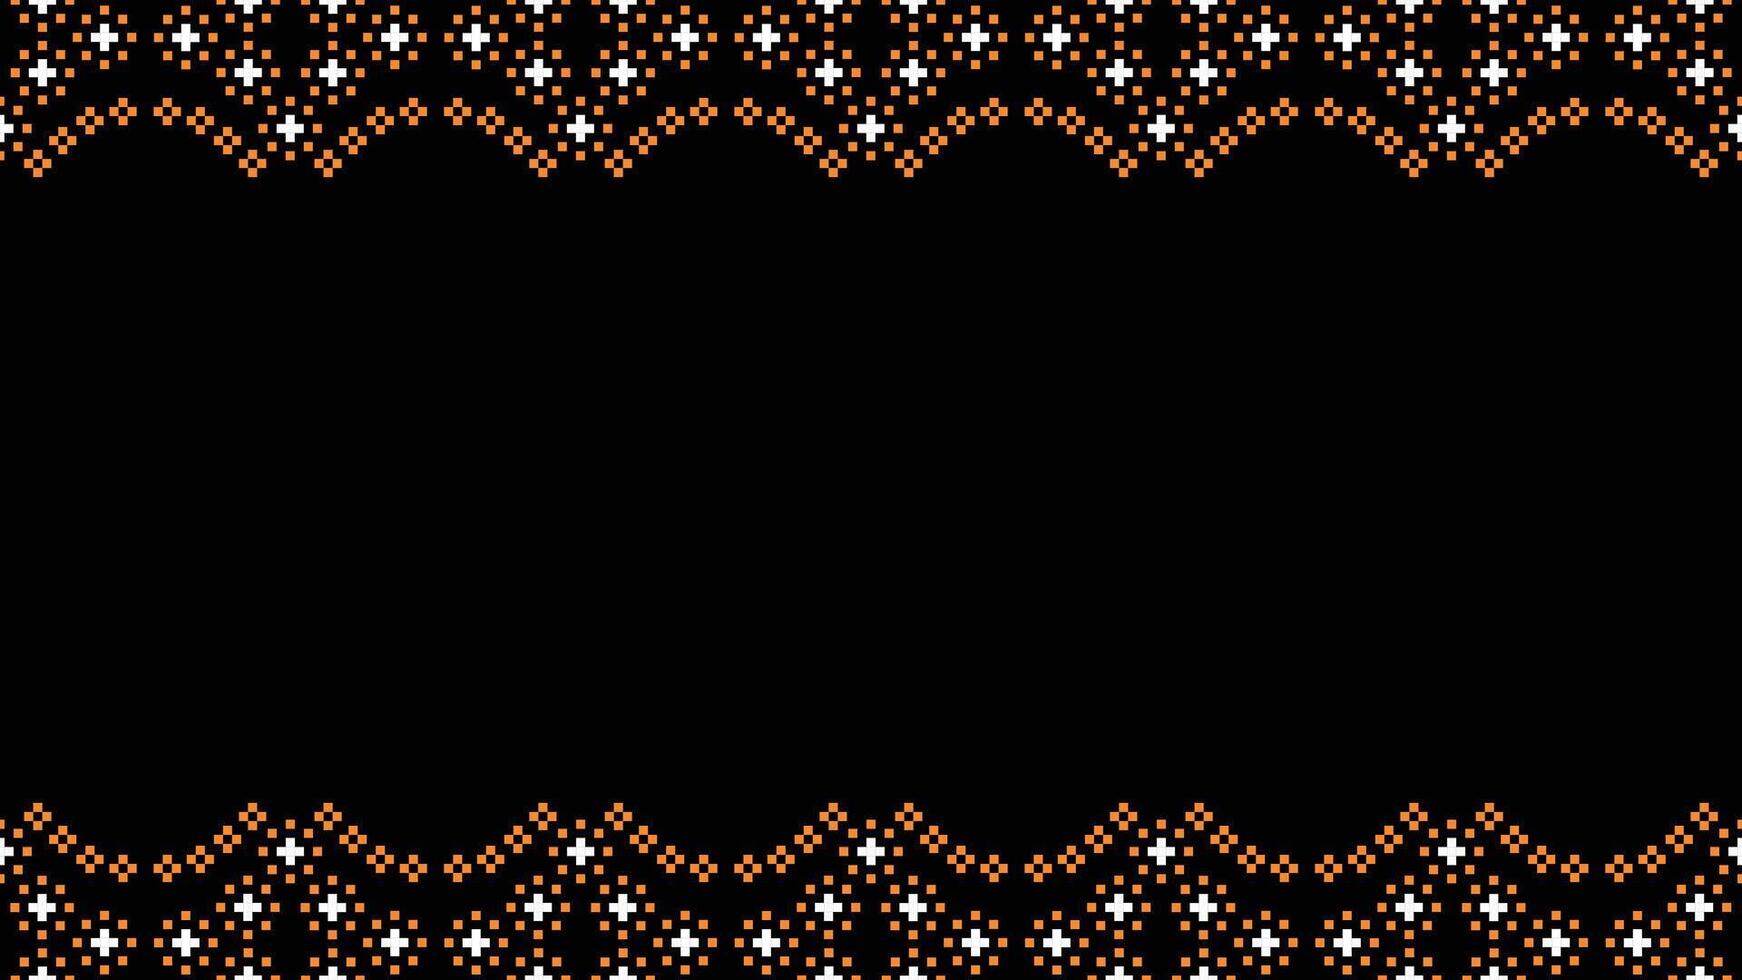 Traditional ethnic motifs ikat geometric fabric pattern cross stitch.Ikat embroidery Ethnic oriental Pixel black background.Abstract,vector,illustration. Texture,scarf,decoration,wallpaper. vector